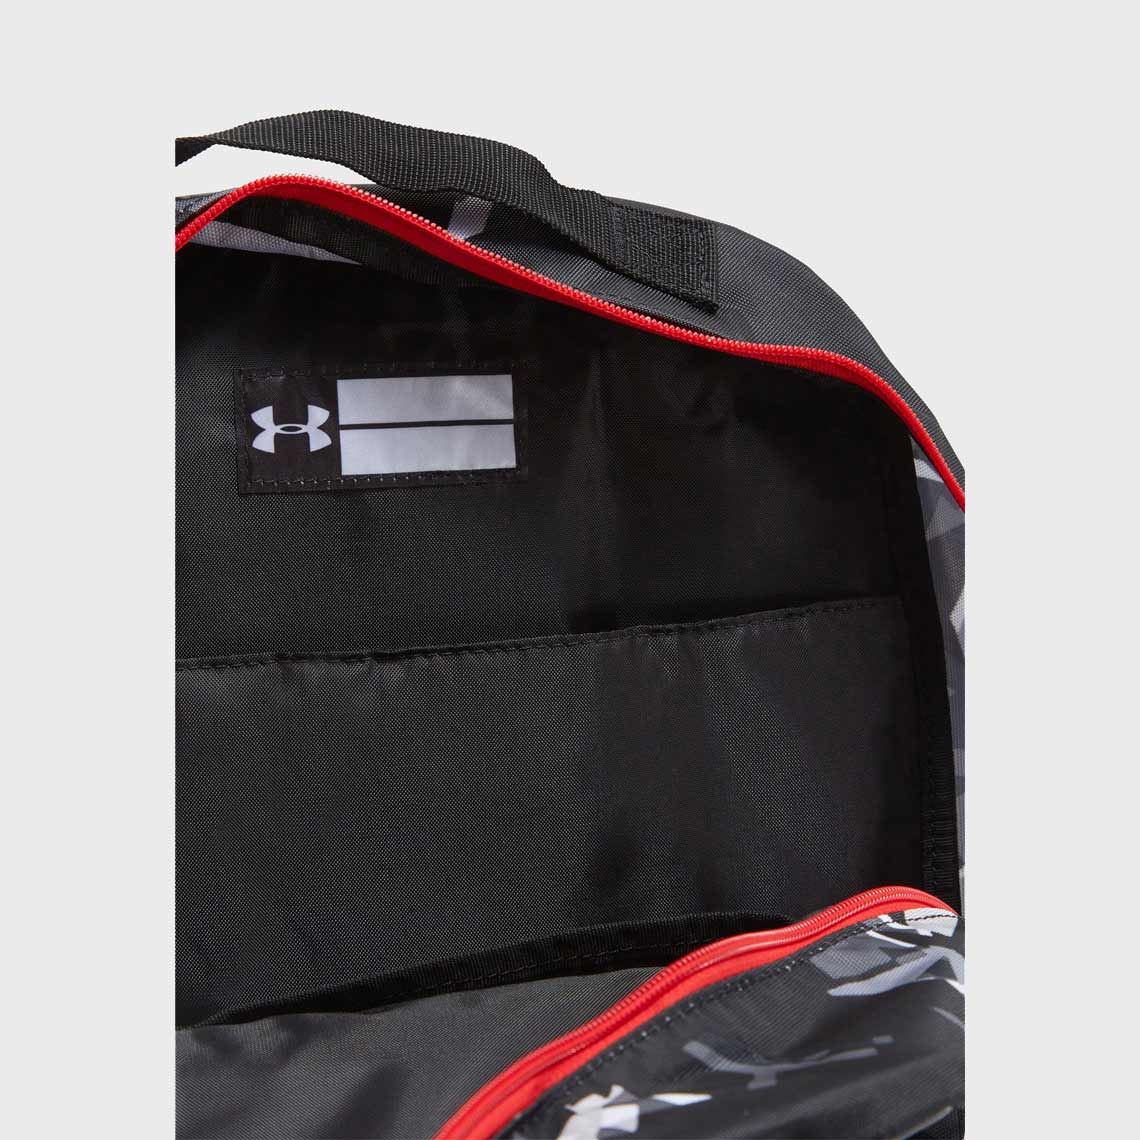 UNDER ARMOUR Black / One Size Under Armour baby backpack model